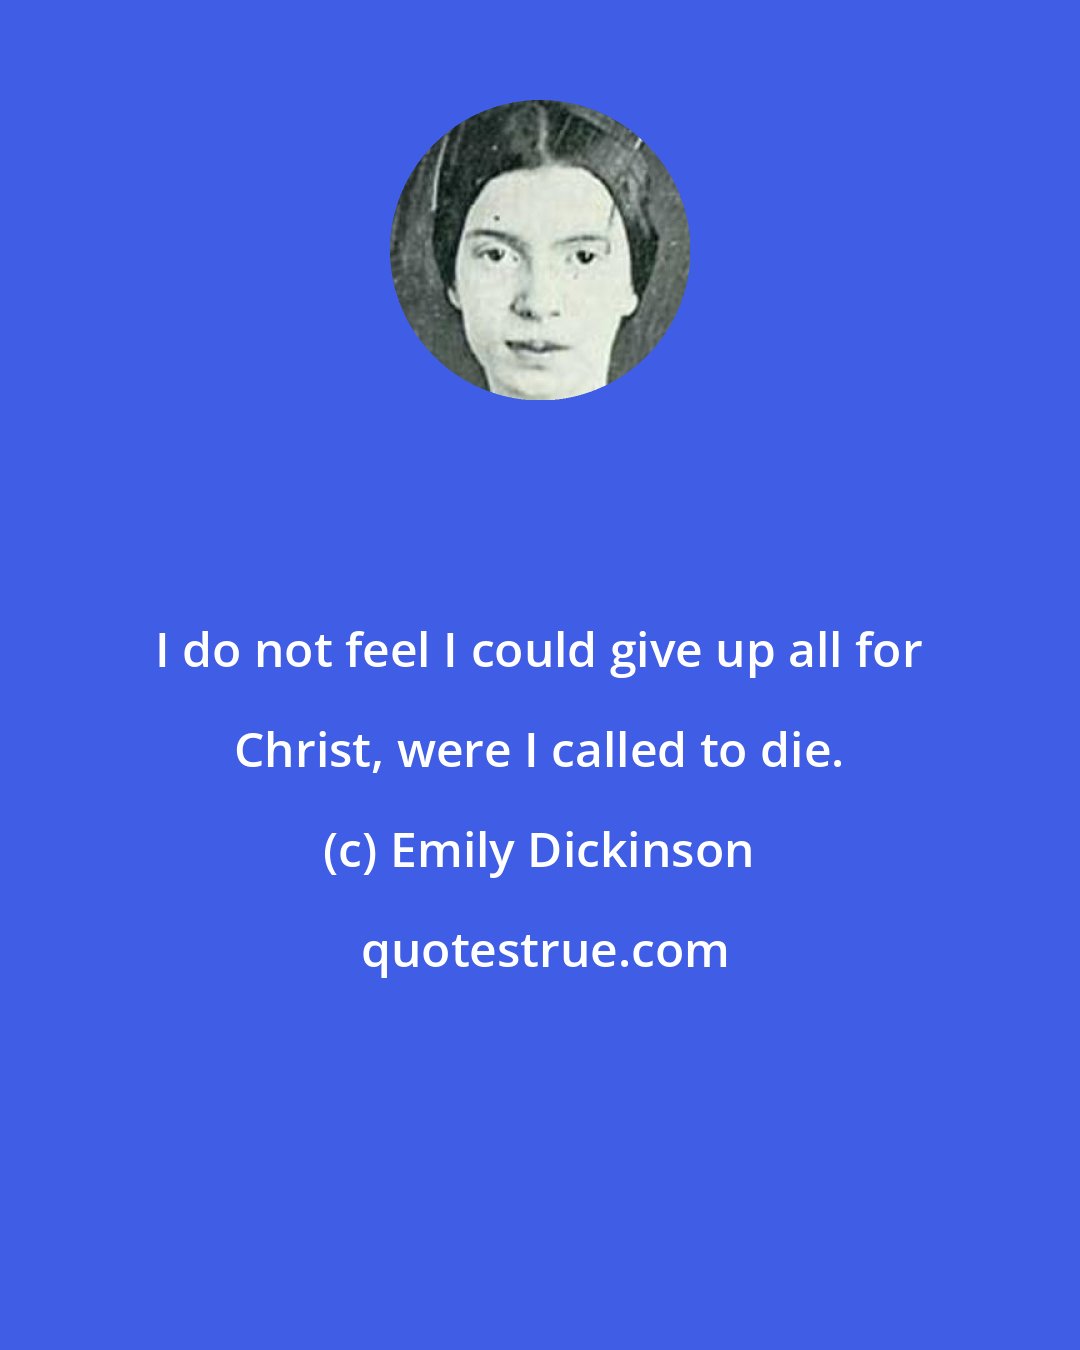 Emily Dickinson: I do not feel I could give up all for Christ, were I called to die.